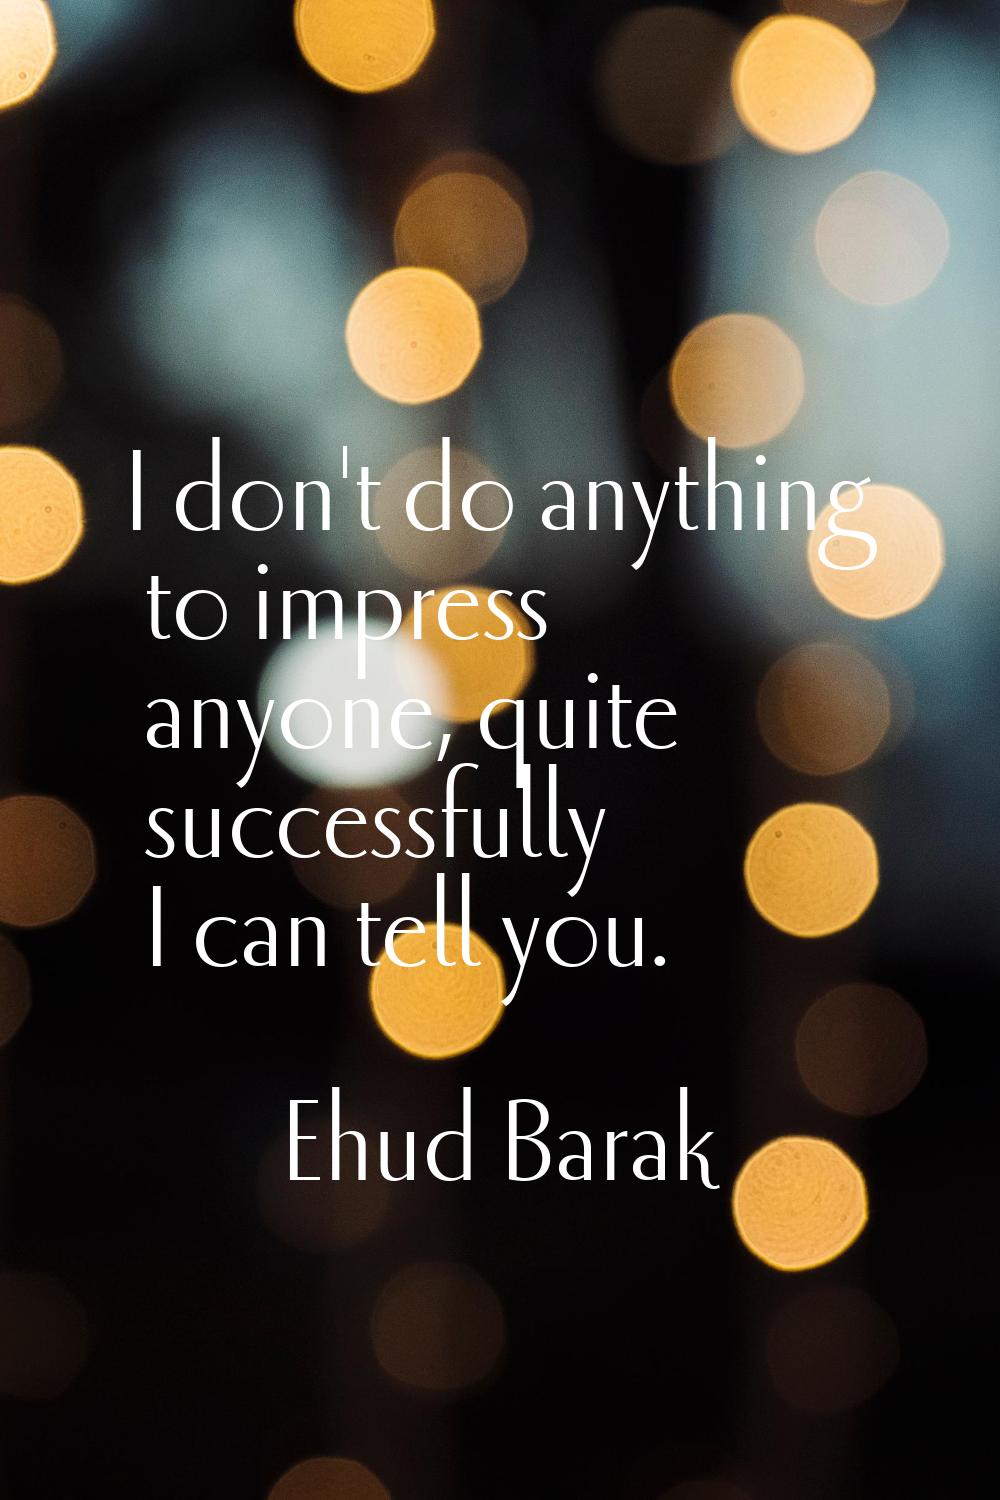 I don't do anything to impress anyone, quite successfully I can tell you.